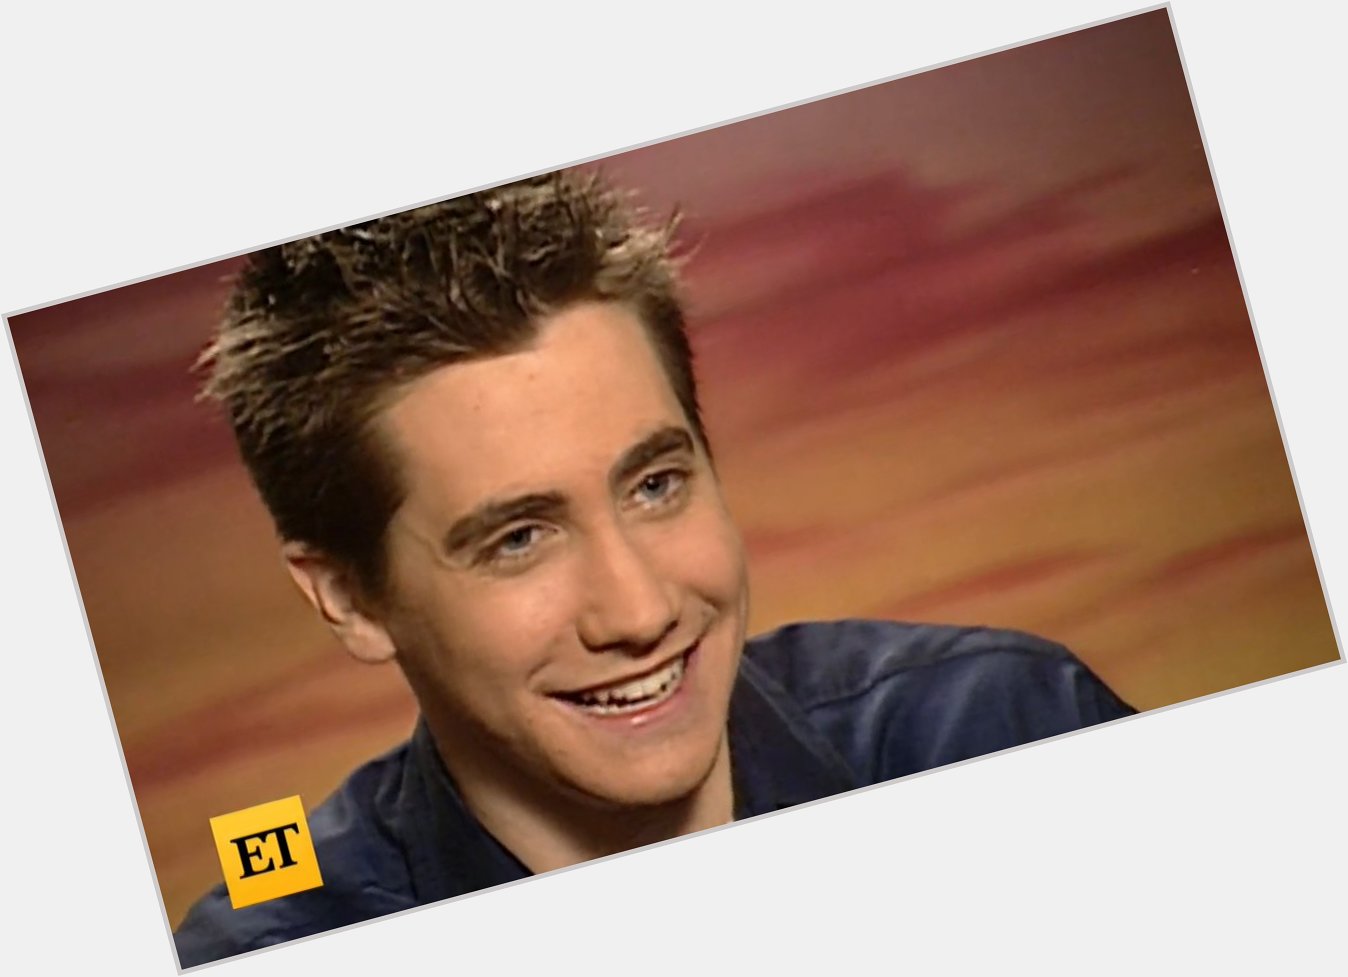 From \Donnie Darko\ to Jake Gyllenhaal has come a long way. Happy birthday, Jake! 